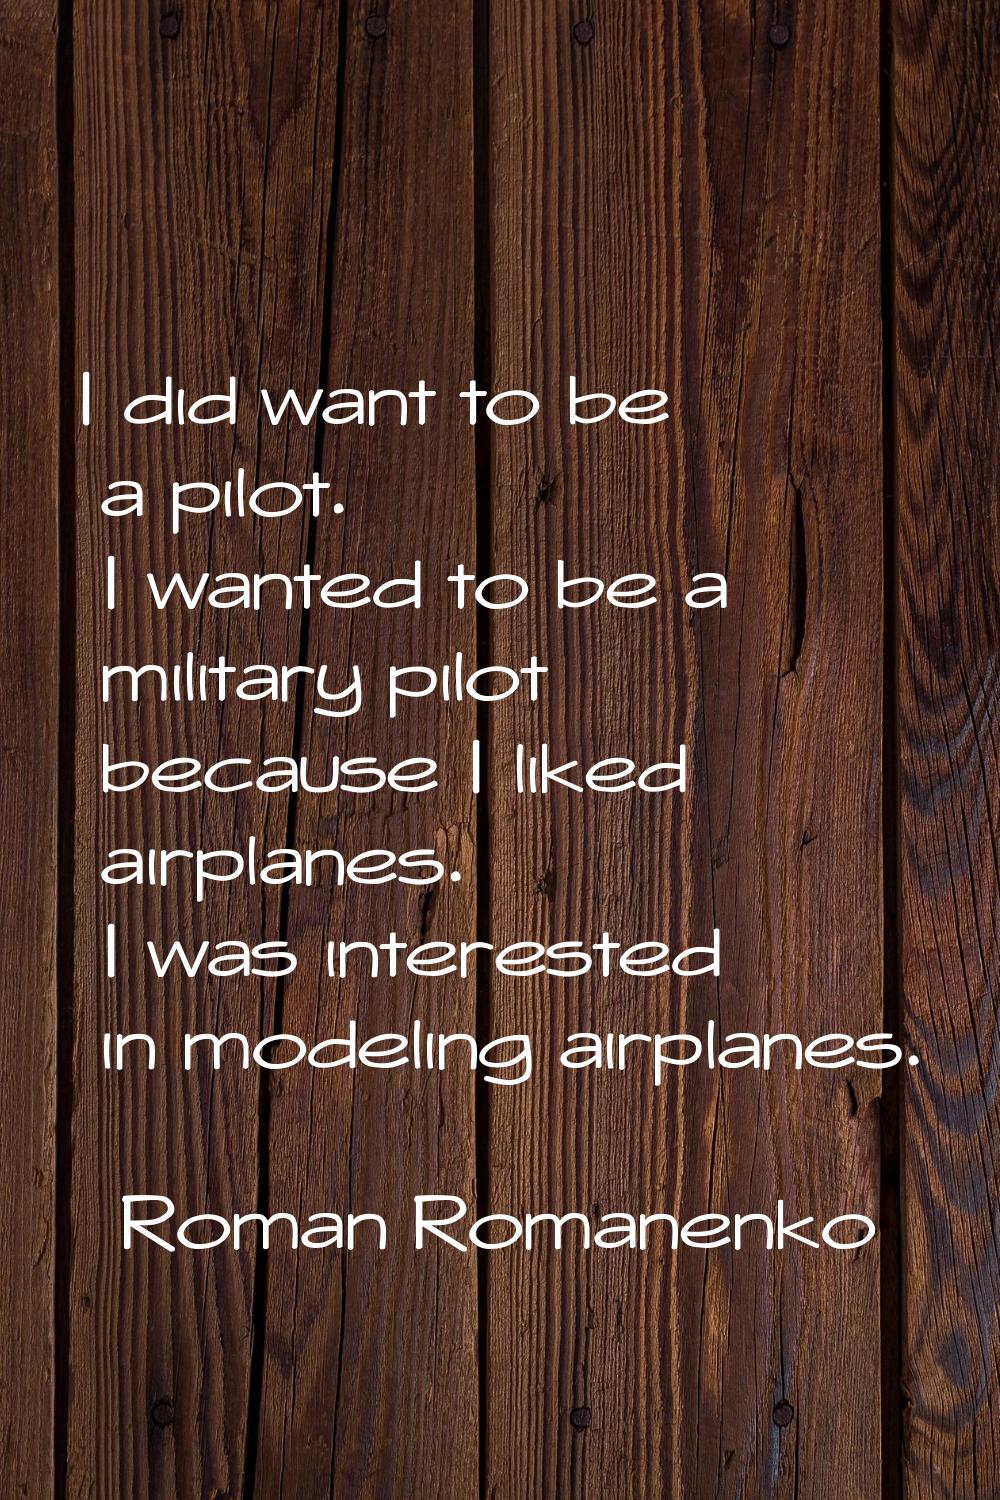 I did want to be a pilot. I wanted to be a military pilot because I liked airplanes. I was interest